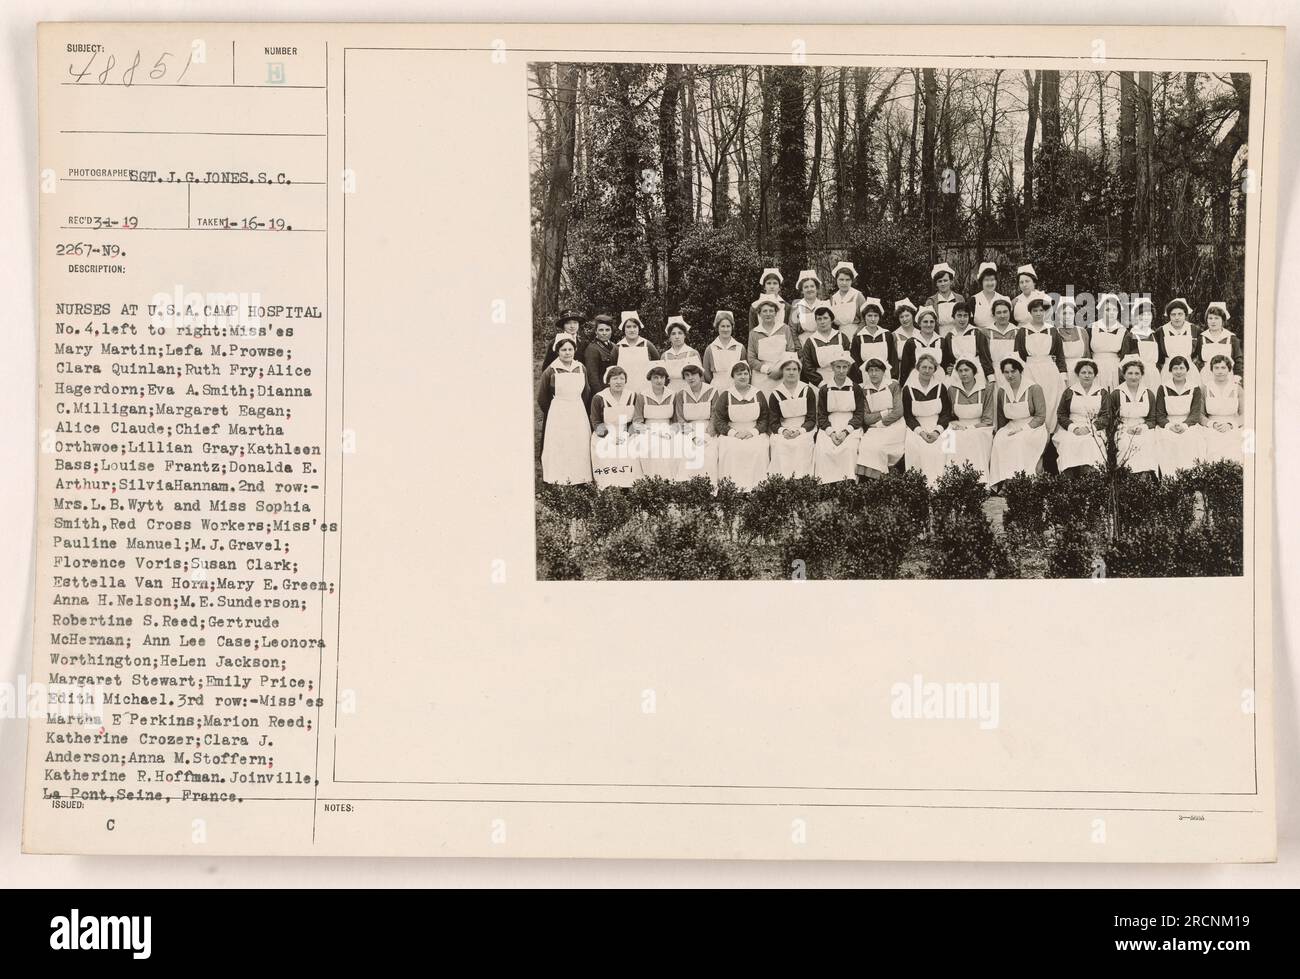 'Nurses at U.S.A. Camp Hospital No. 4, Joinville, La Pont, Seine, France. The photograph, taken on 16-19, shows the nurses organized in rows. In the front row, from left to right, are Miss'es Mary Martin, Lefa M. Prowse, Clara Quinlan, Ruth Pry, Alice Hagerdorn, Eva A. Smith, Diana C. Milligan, Margaret Eagan, Alice Claude, Chief Martha Orthwoe, Lillian Gray, Kathleen Bass, Louise Prants, Donalda E. Arthur, and Sylvia Hannam. In the second row are Mrs. L.B. Wytt and Miss Sophia Smith, Red Cross Workers, along with more nurses. The third row includes more nurses. The photo was issued with the n Stock Photo